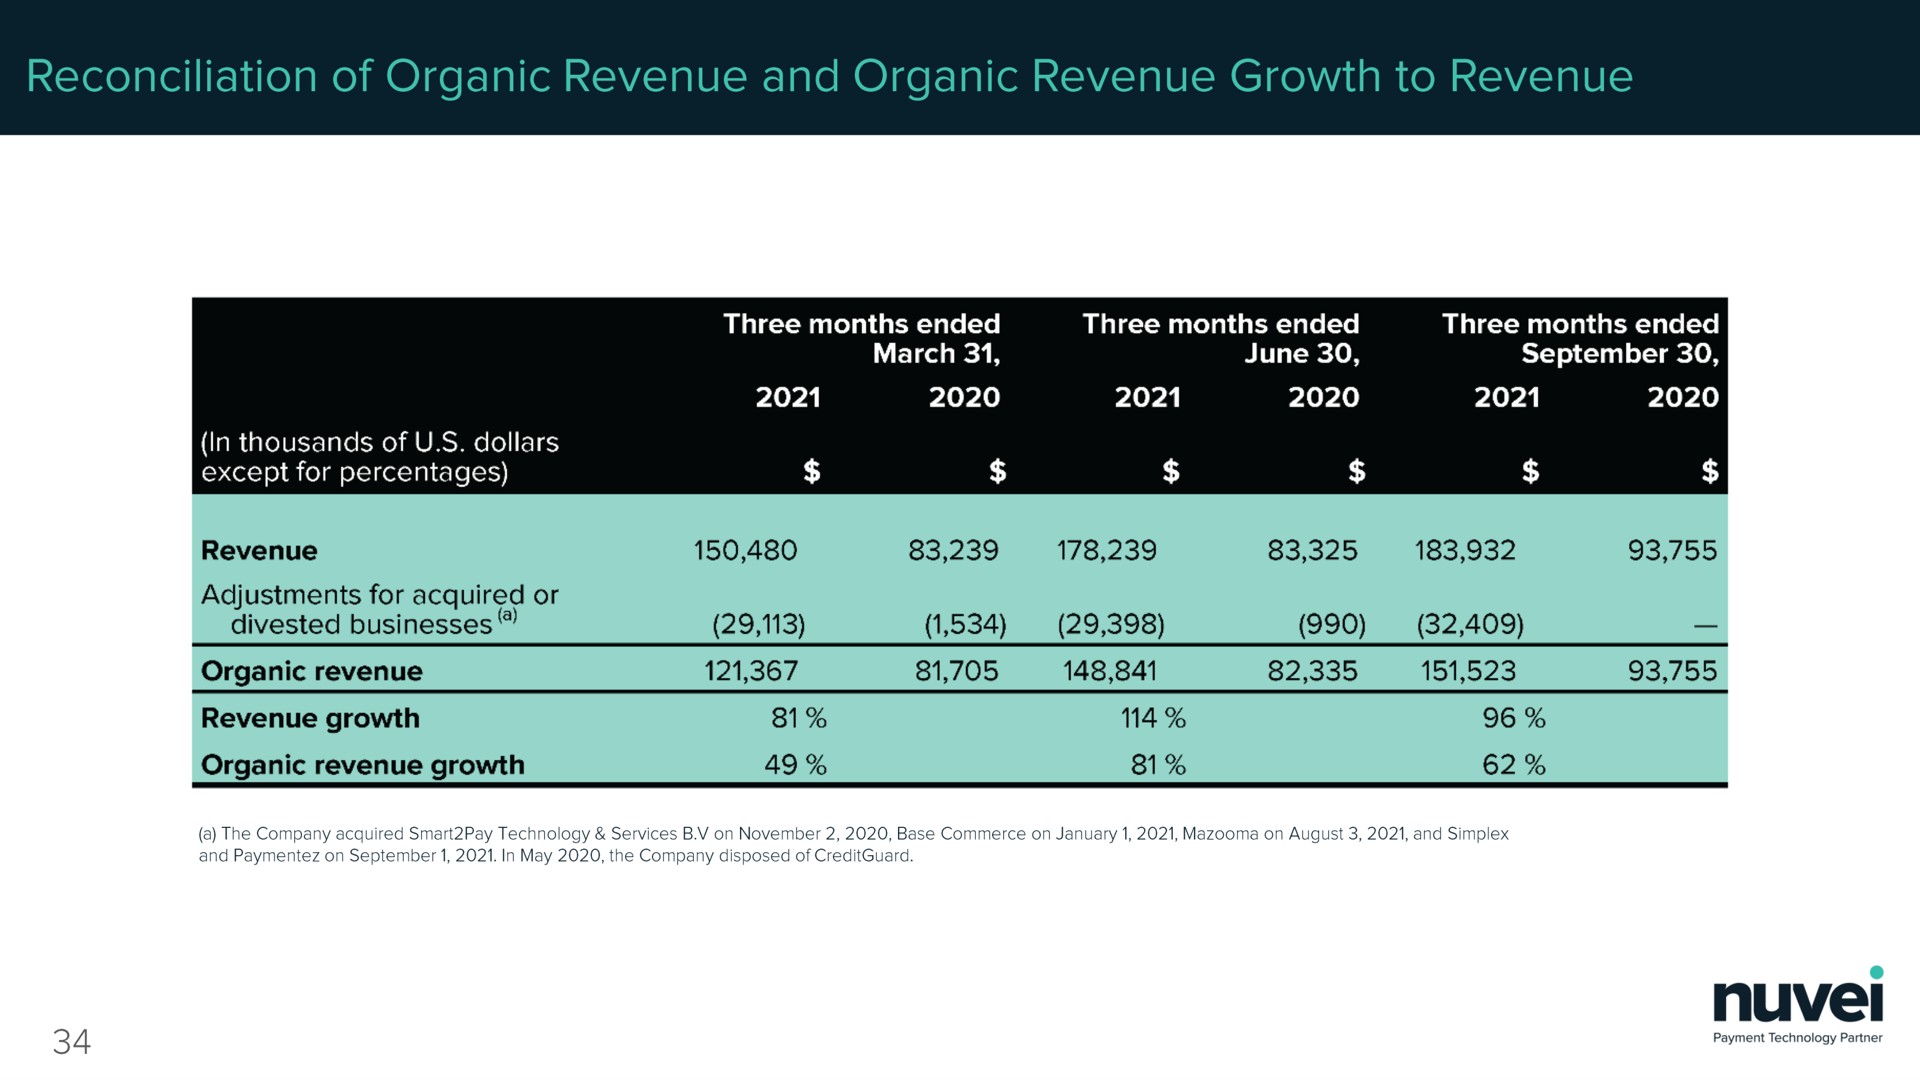 reconciliation of organic revenue and organic revenue growth to revenue divested businesses | Nuvei